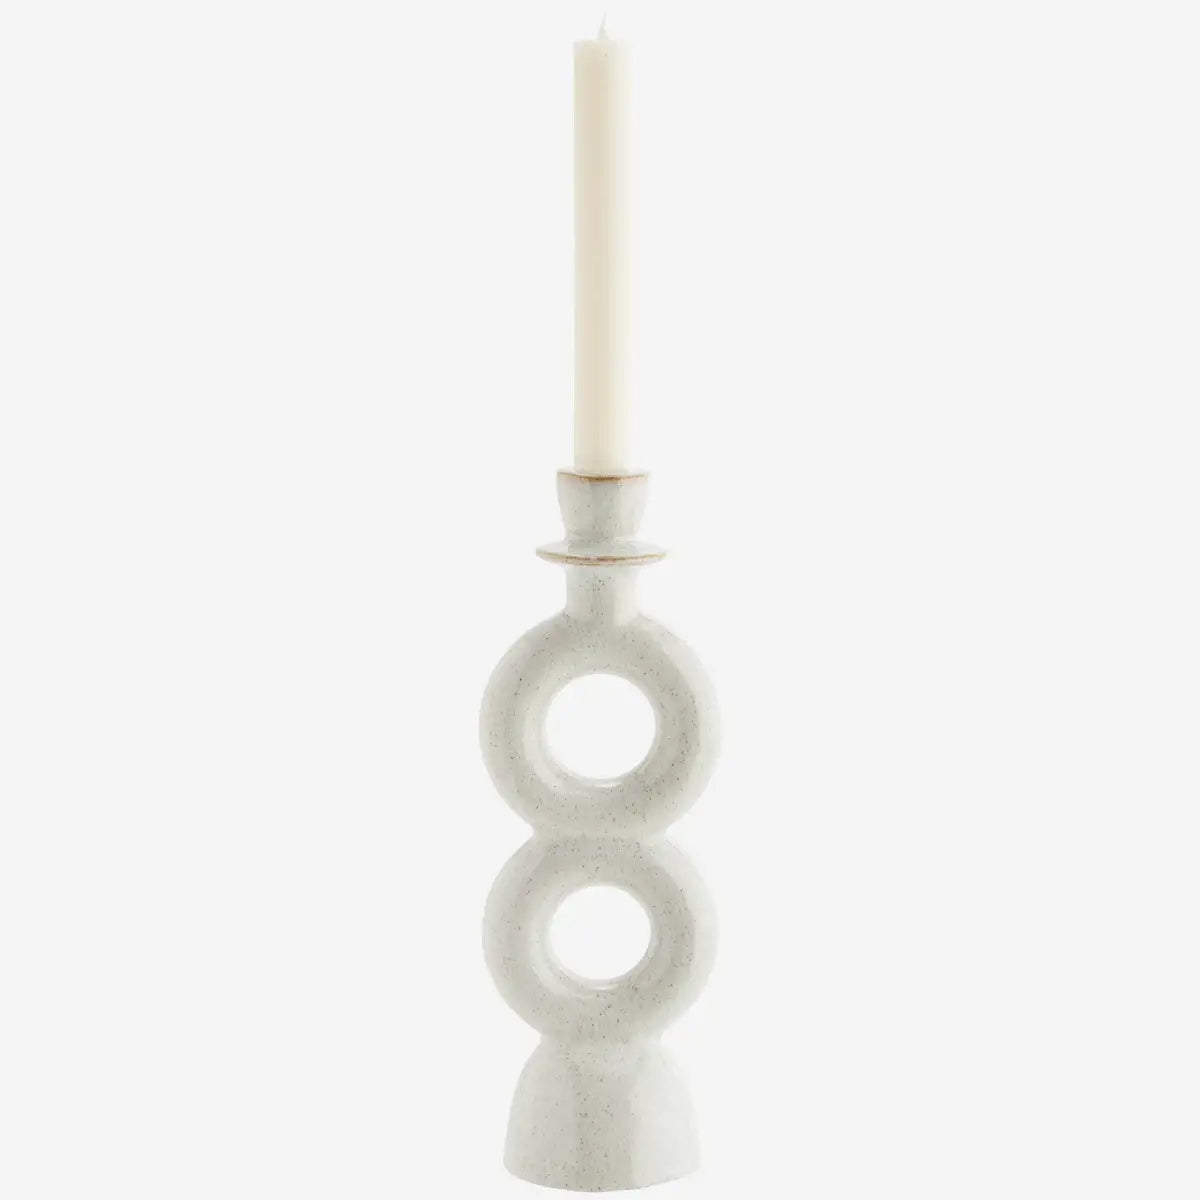 Stoneware candle holder small